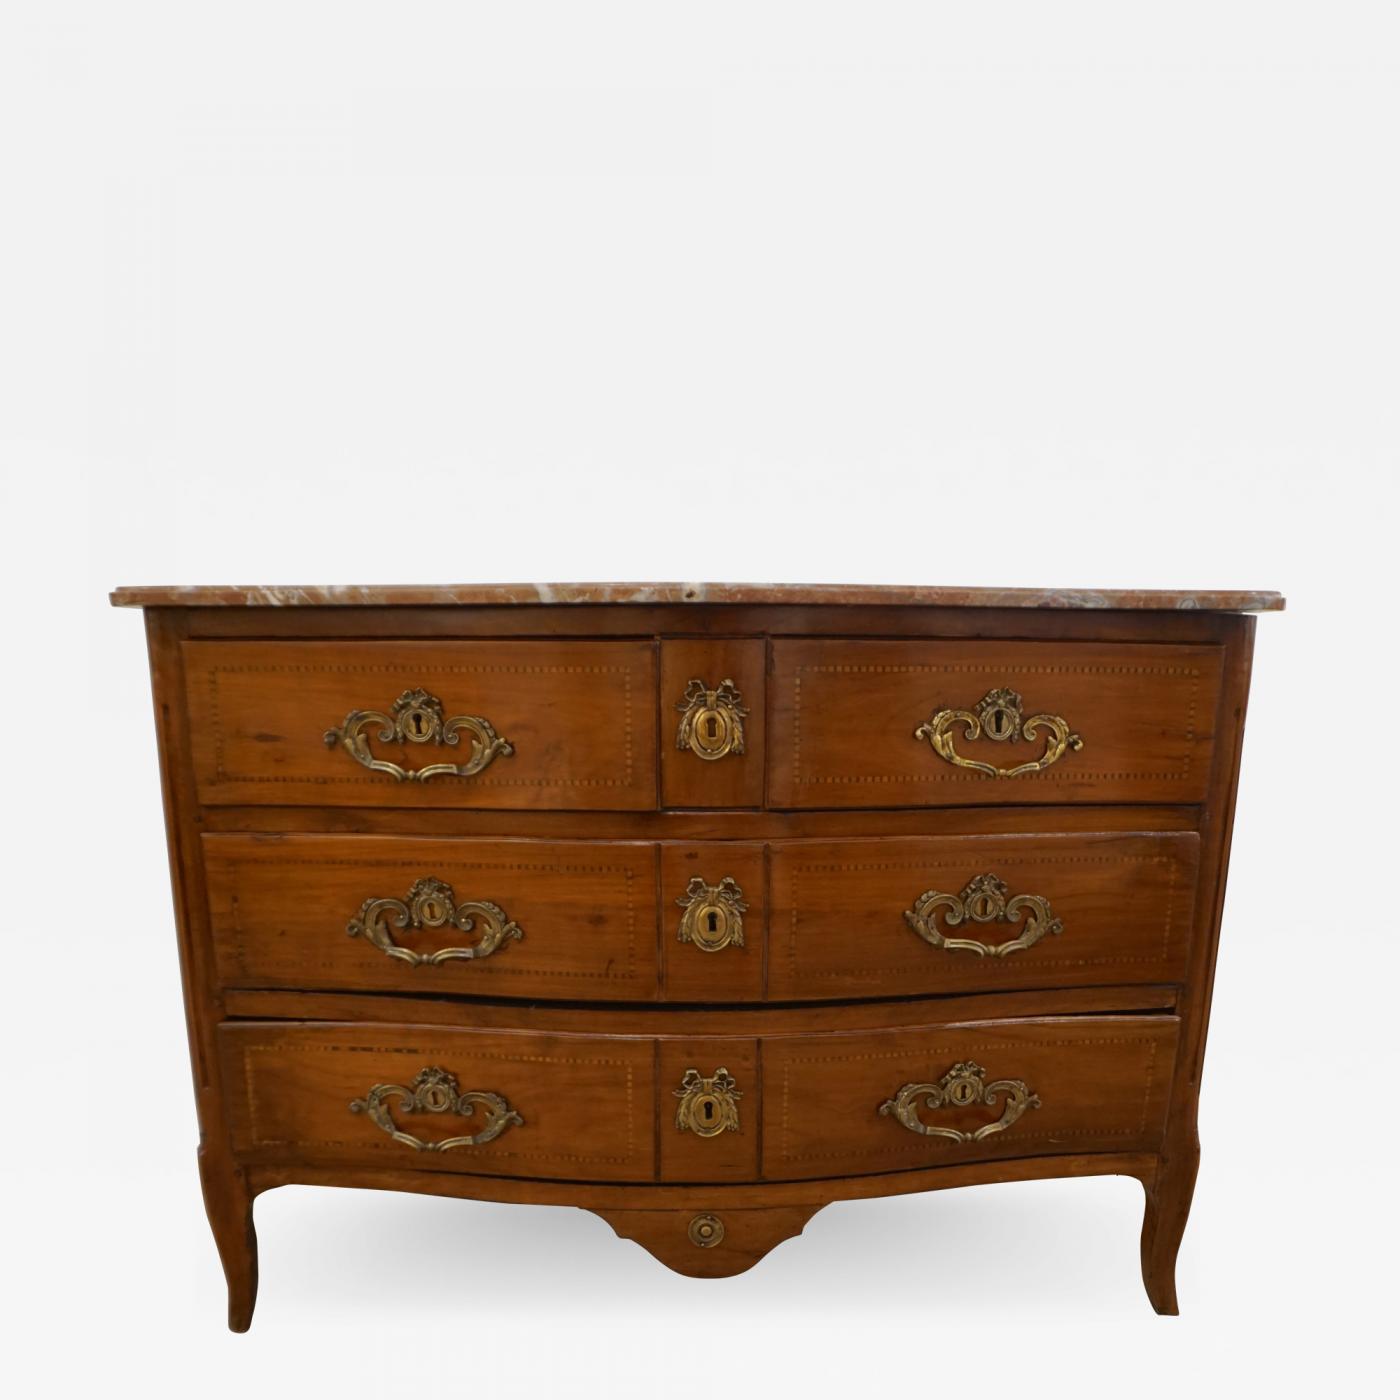 1770s Bow Front French Provincial Marquetry Commode In Solid